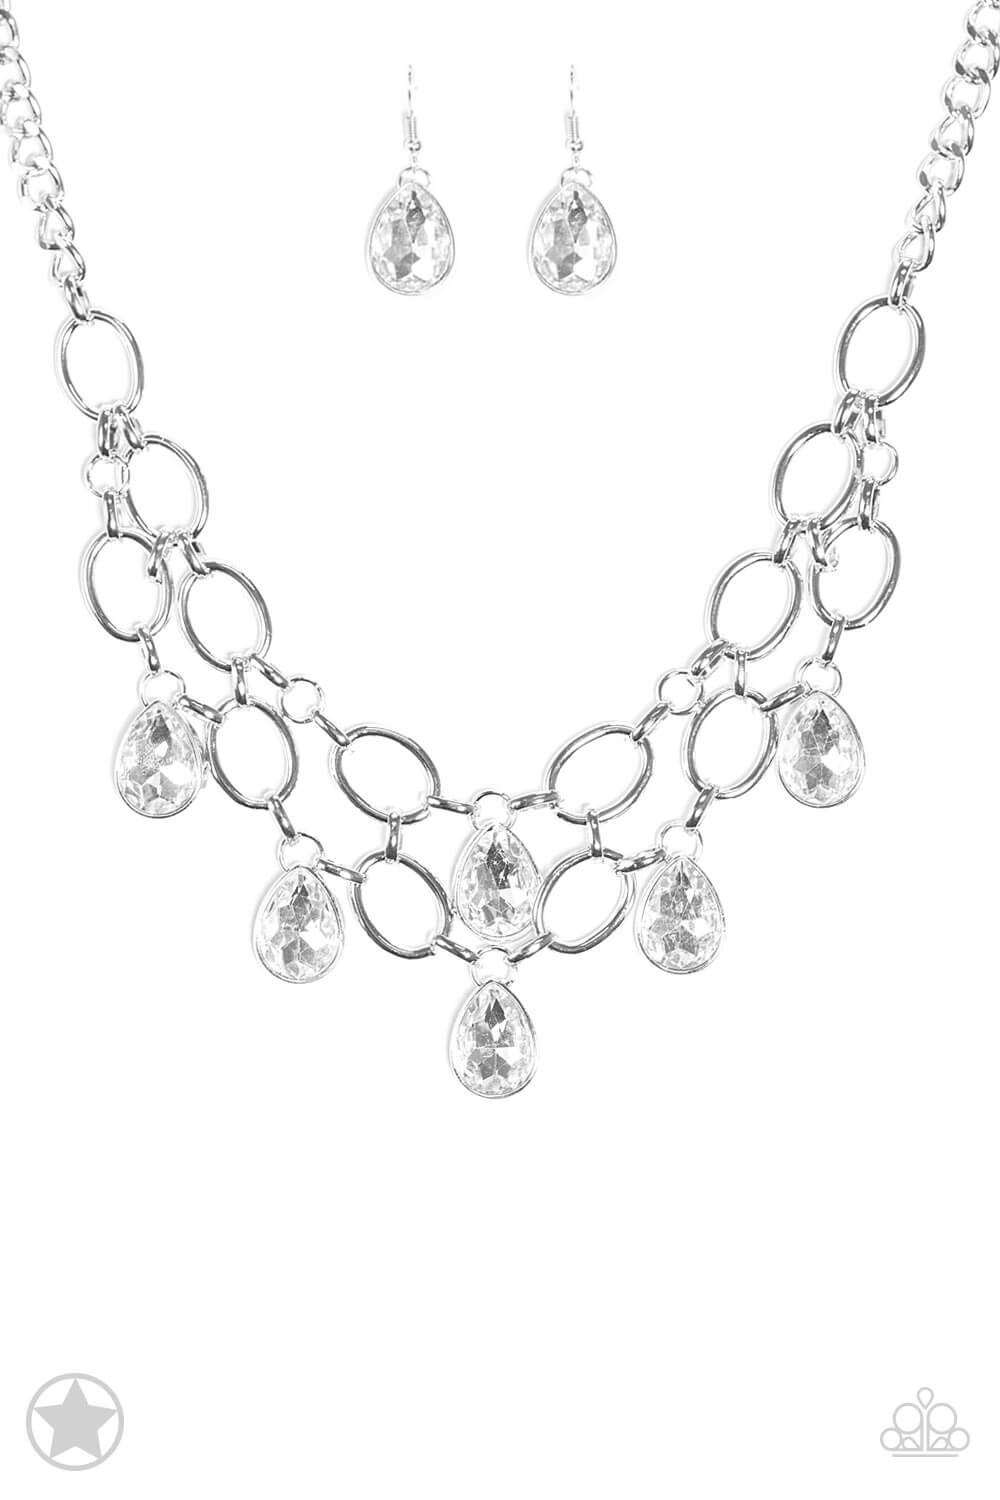 Show-Stopping Shimmer - White Teardrop Necklace Set - Princess Glam Shop